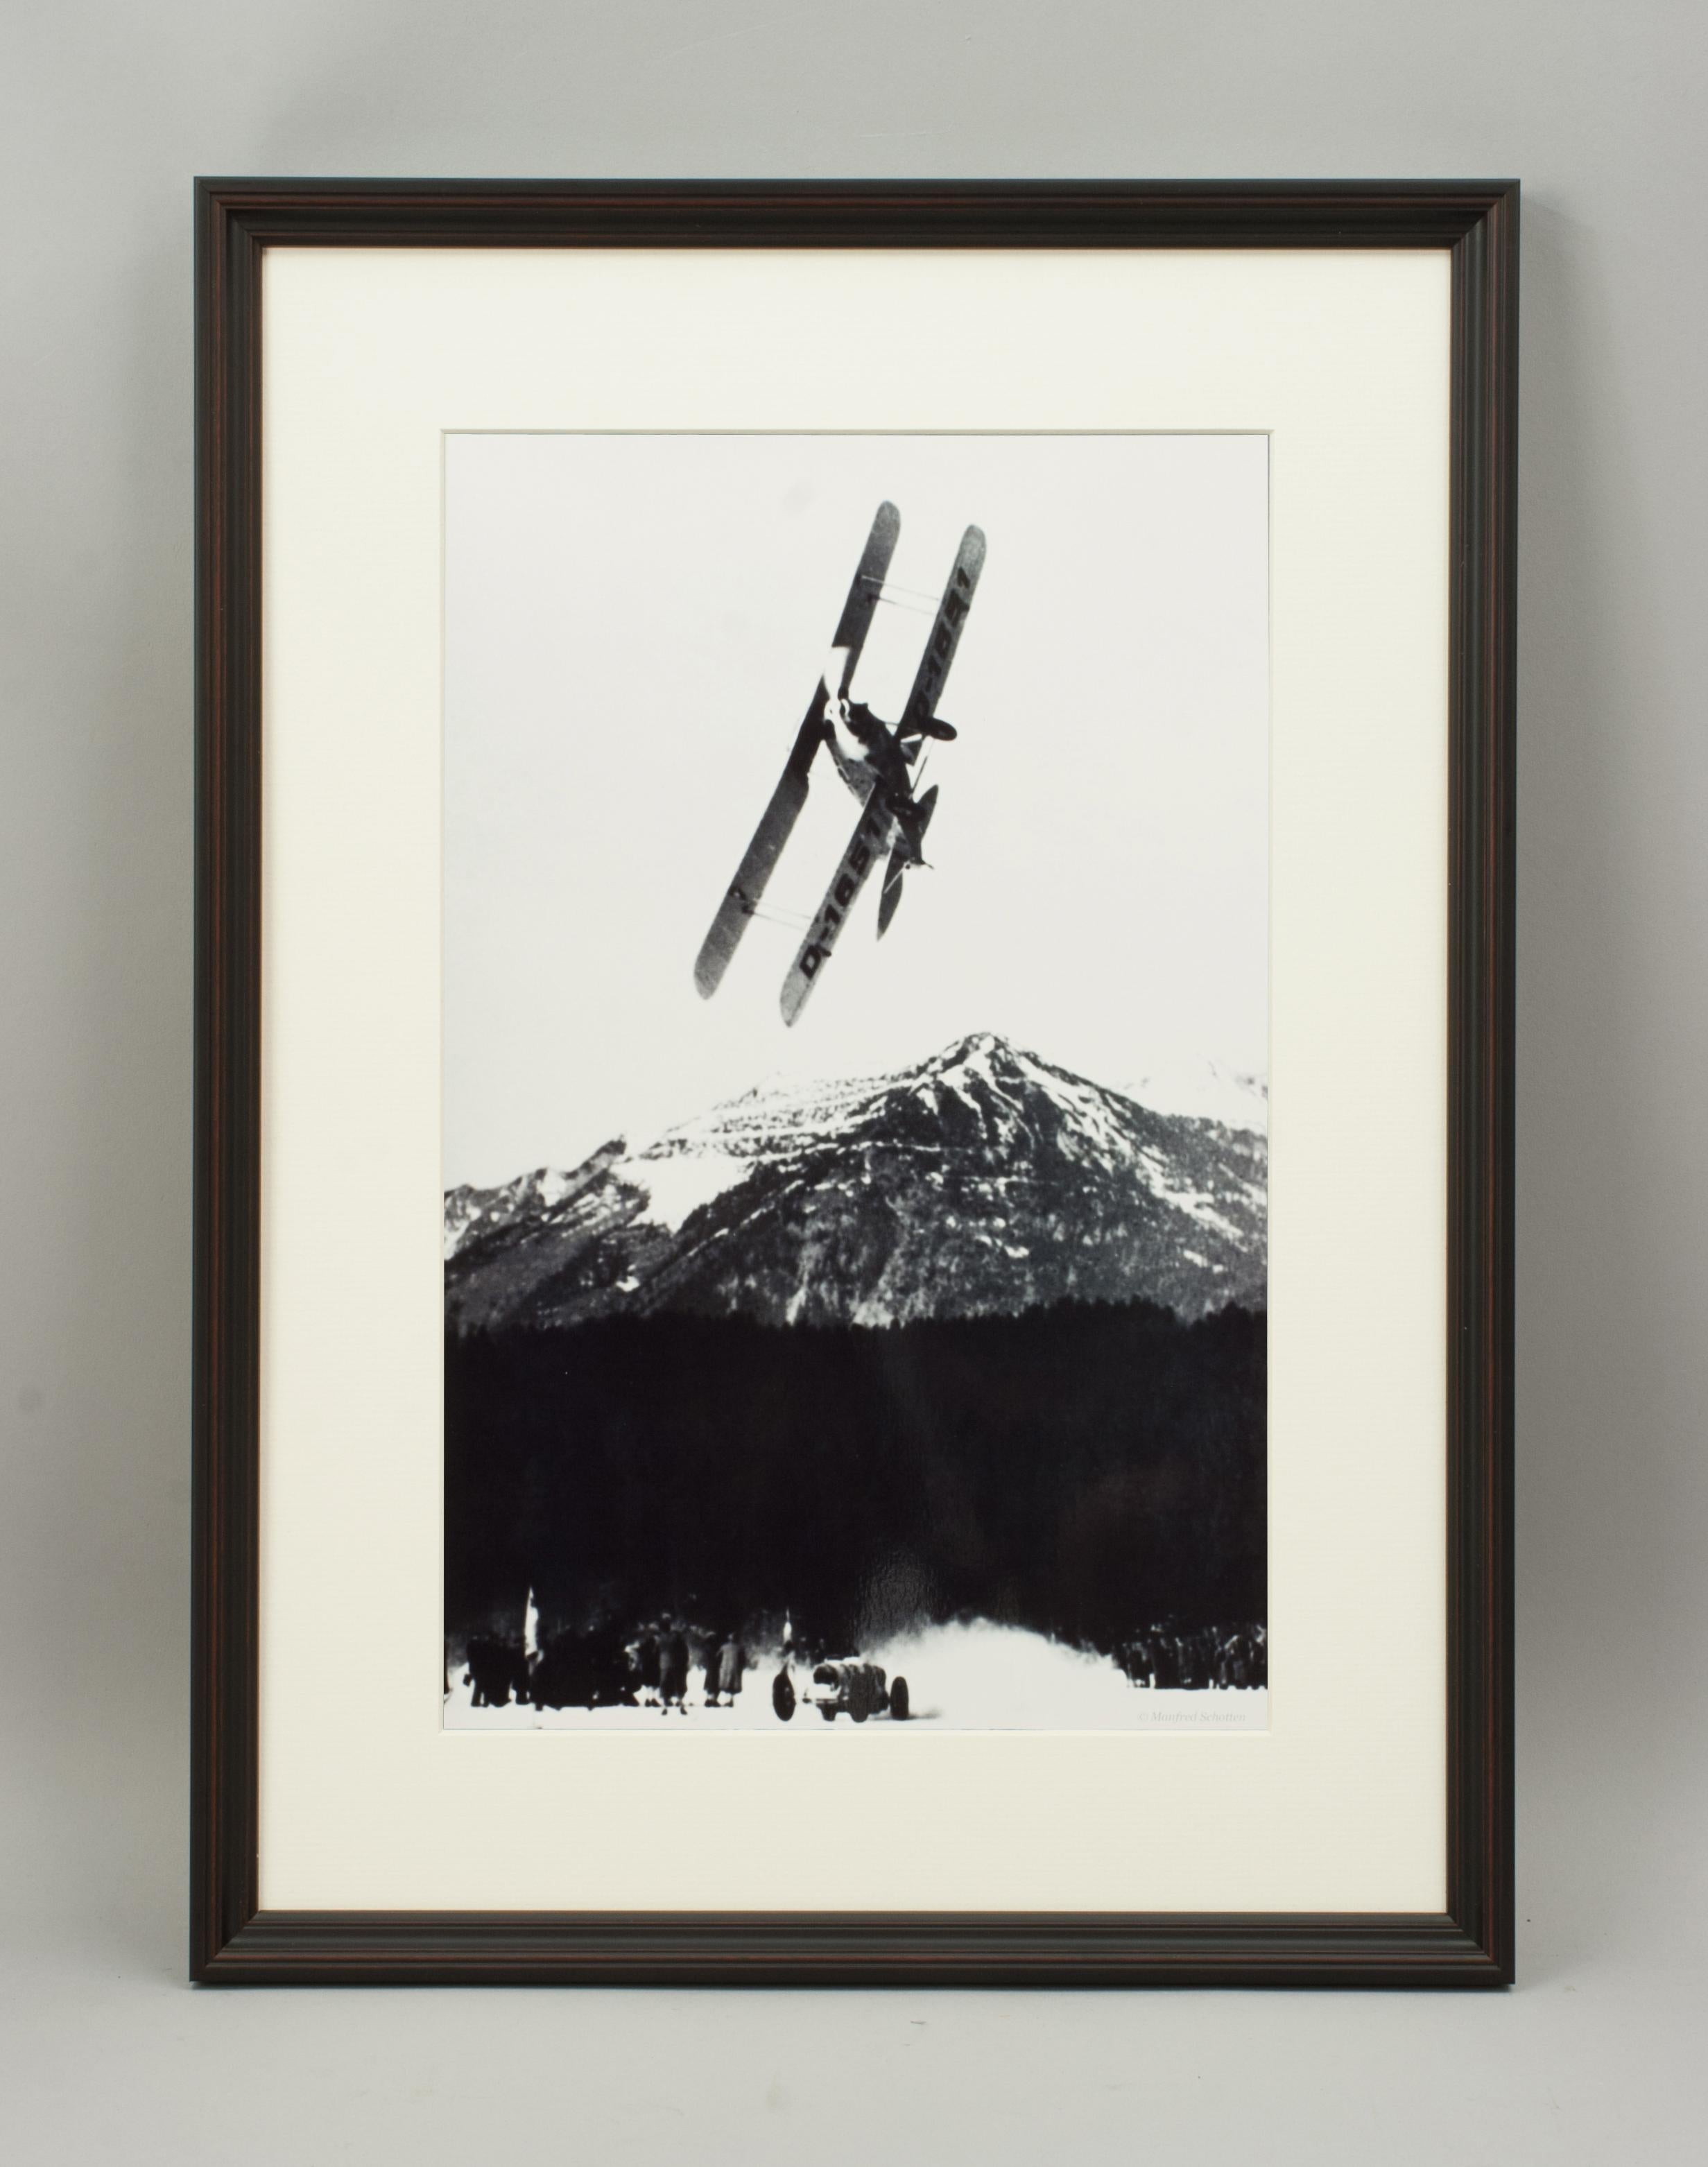 Sporting Art Vintage Style Photography, Framed Alpine Ski Photograph, The Race For Sale